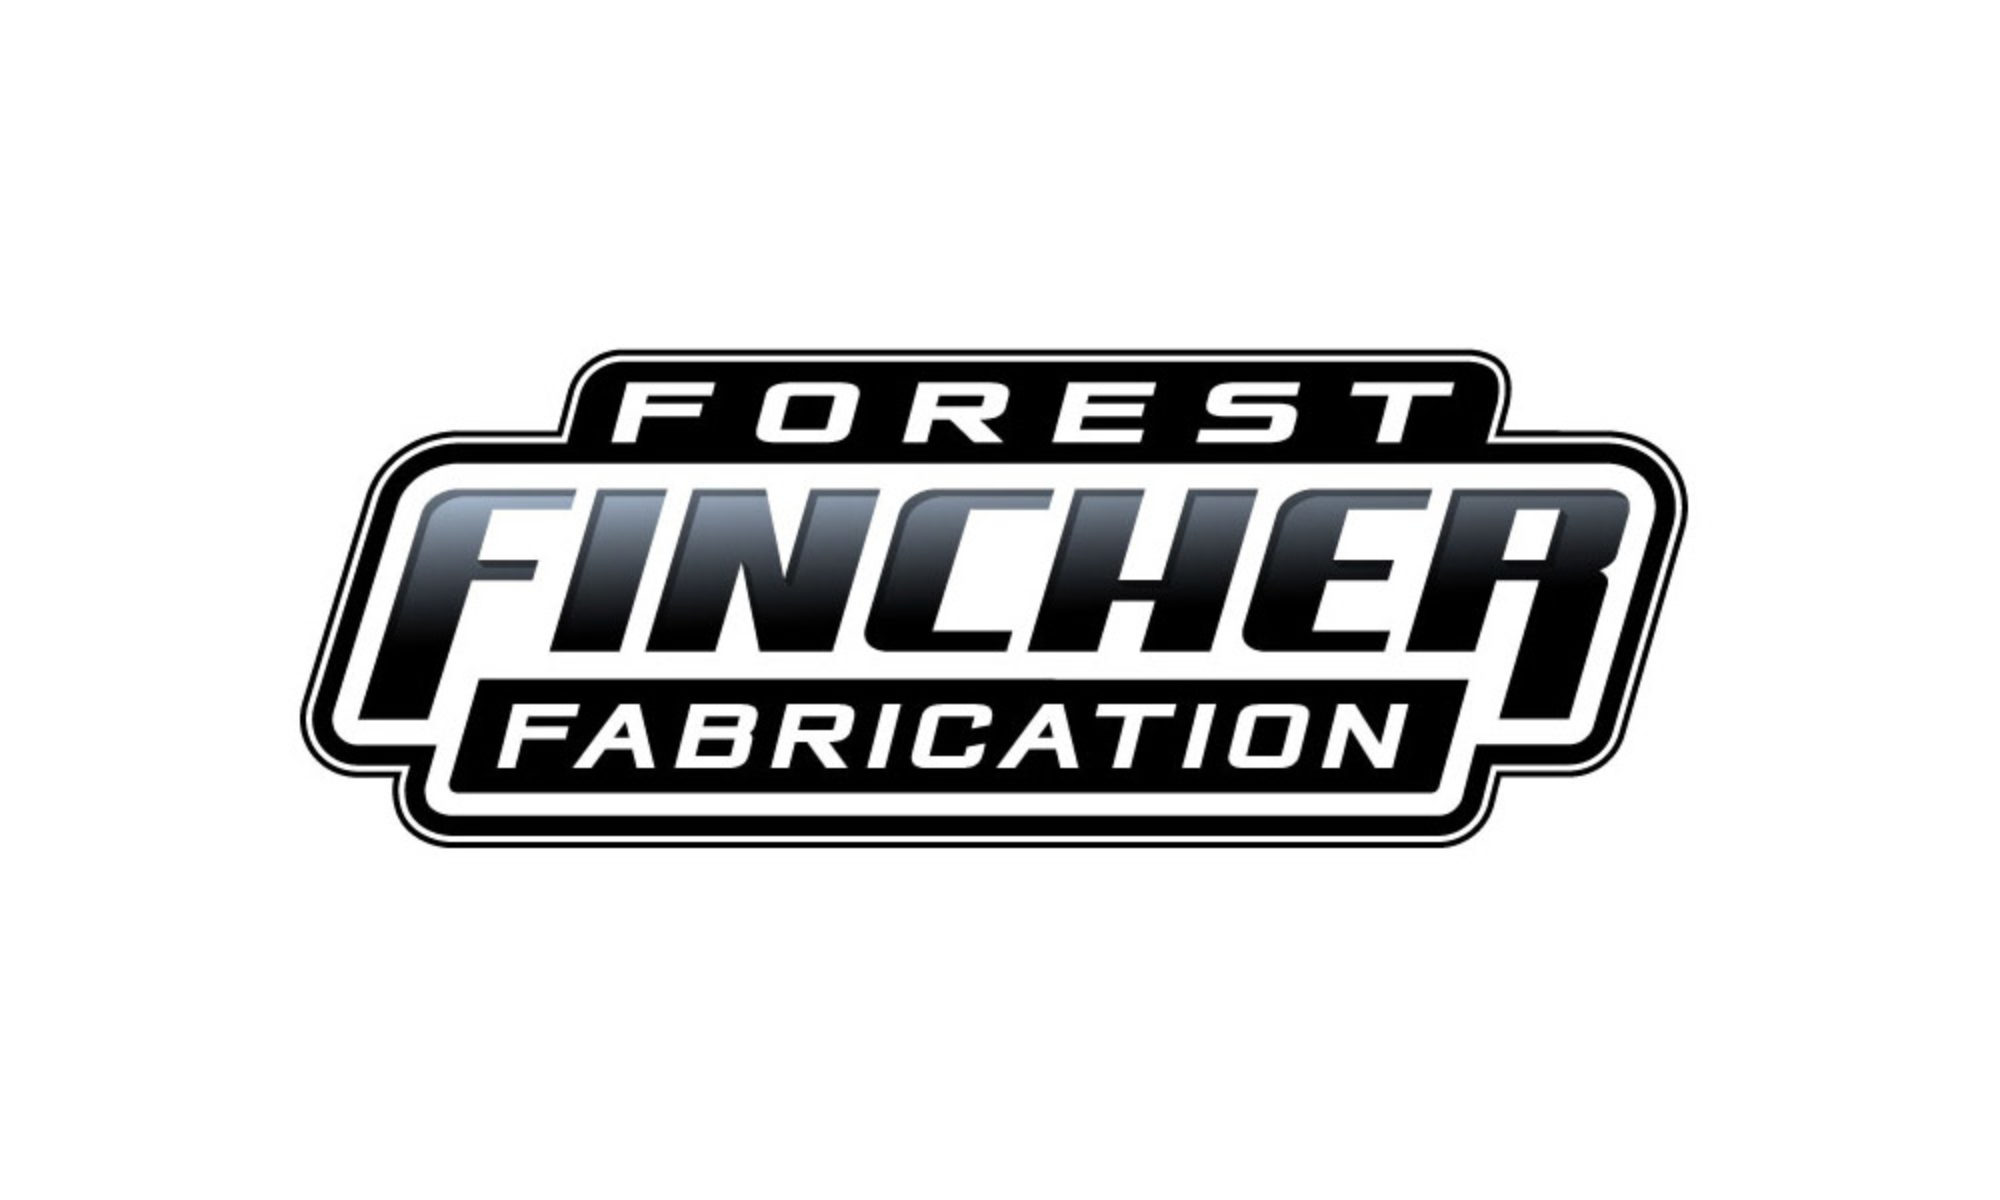 Forest Fincher Fabrication